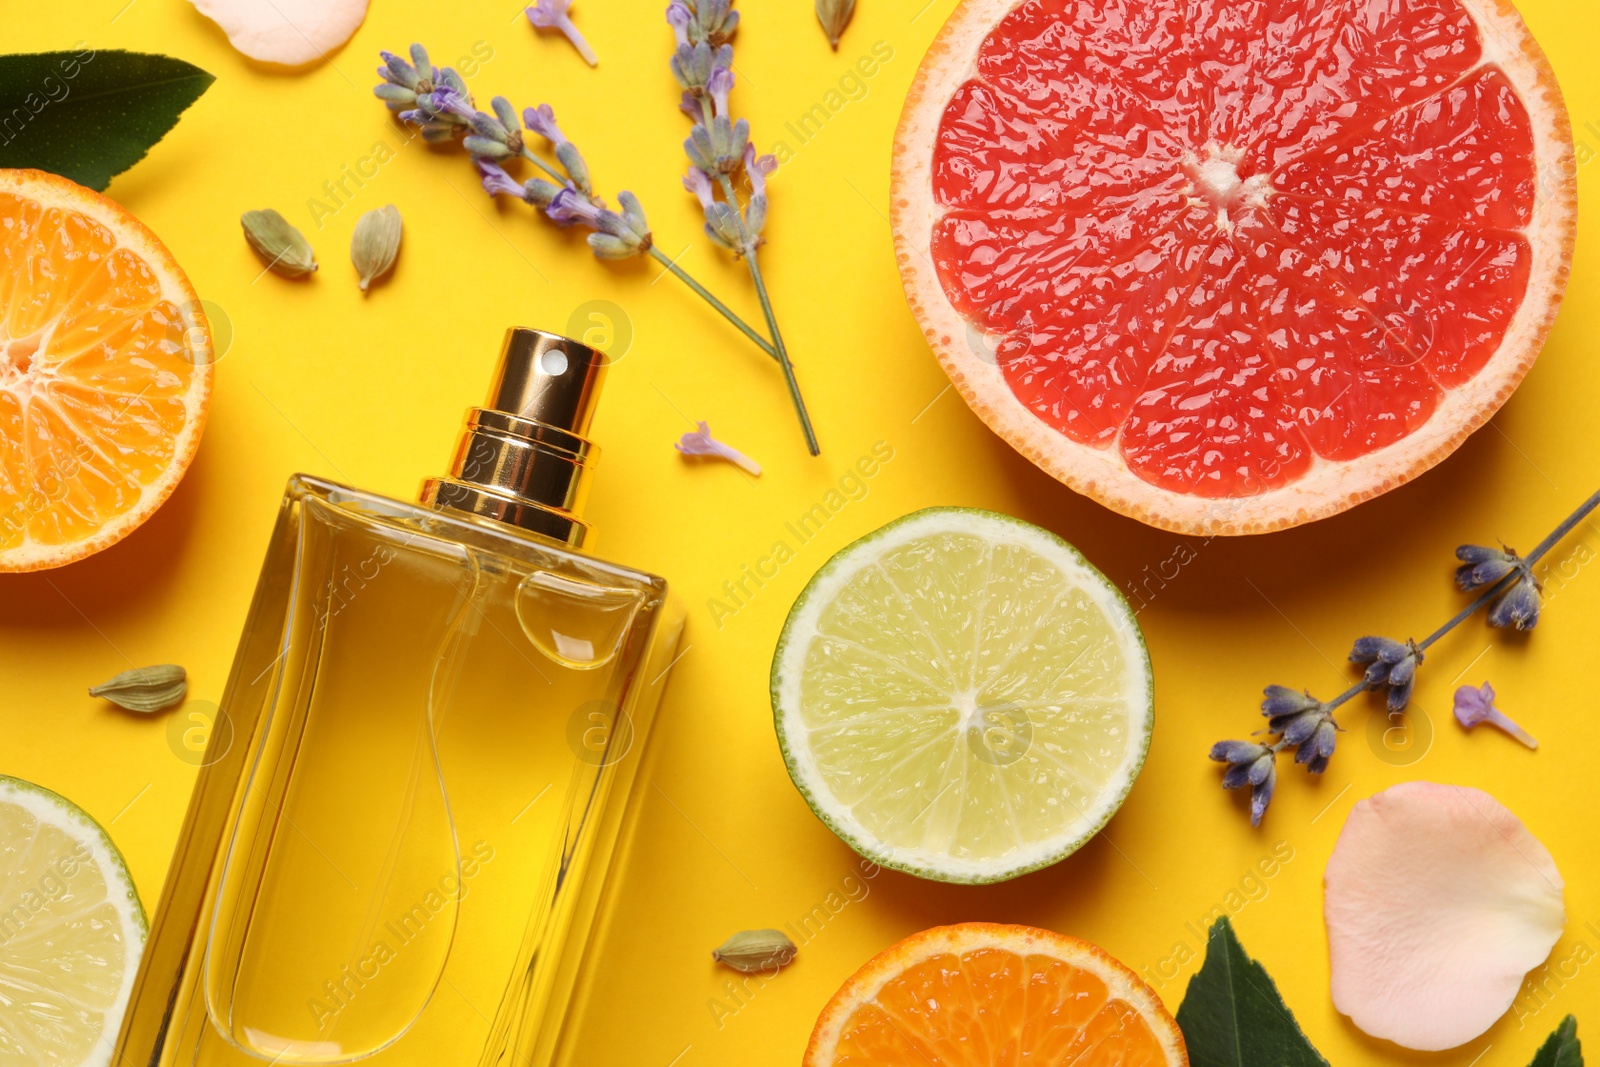 Photo of Flat lay composition with bottle of perfume and fresh citrus fruits on yellow background